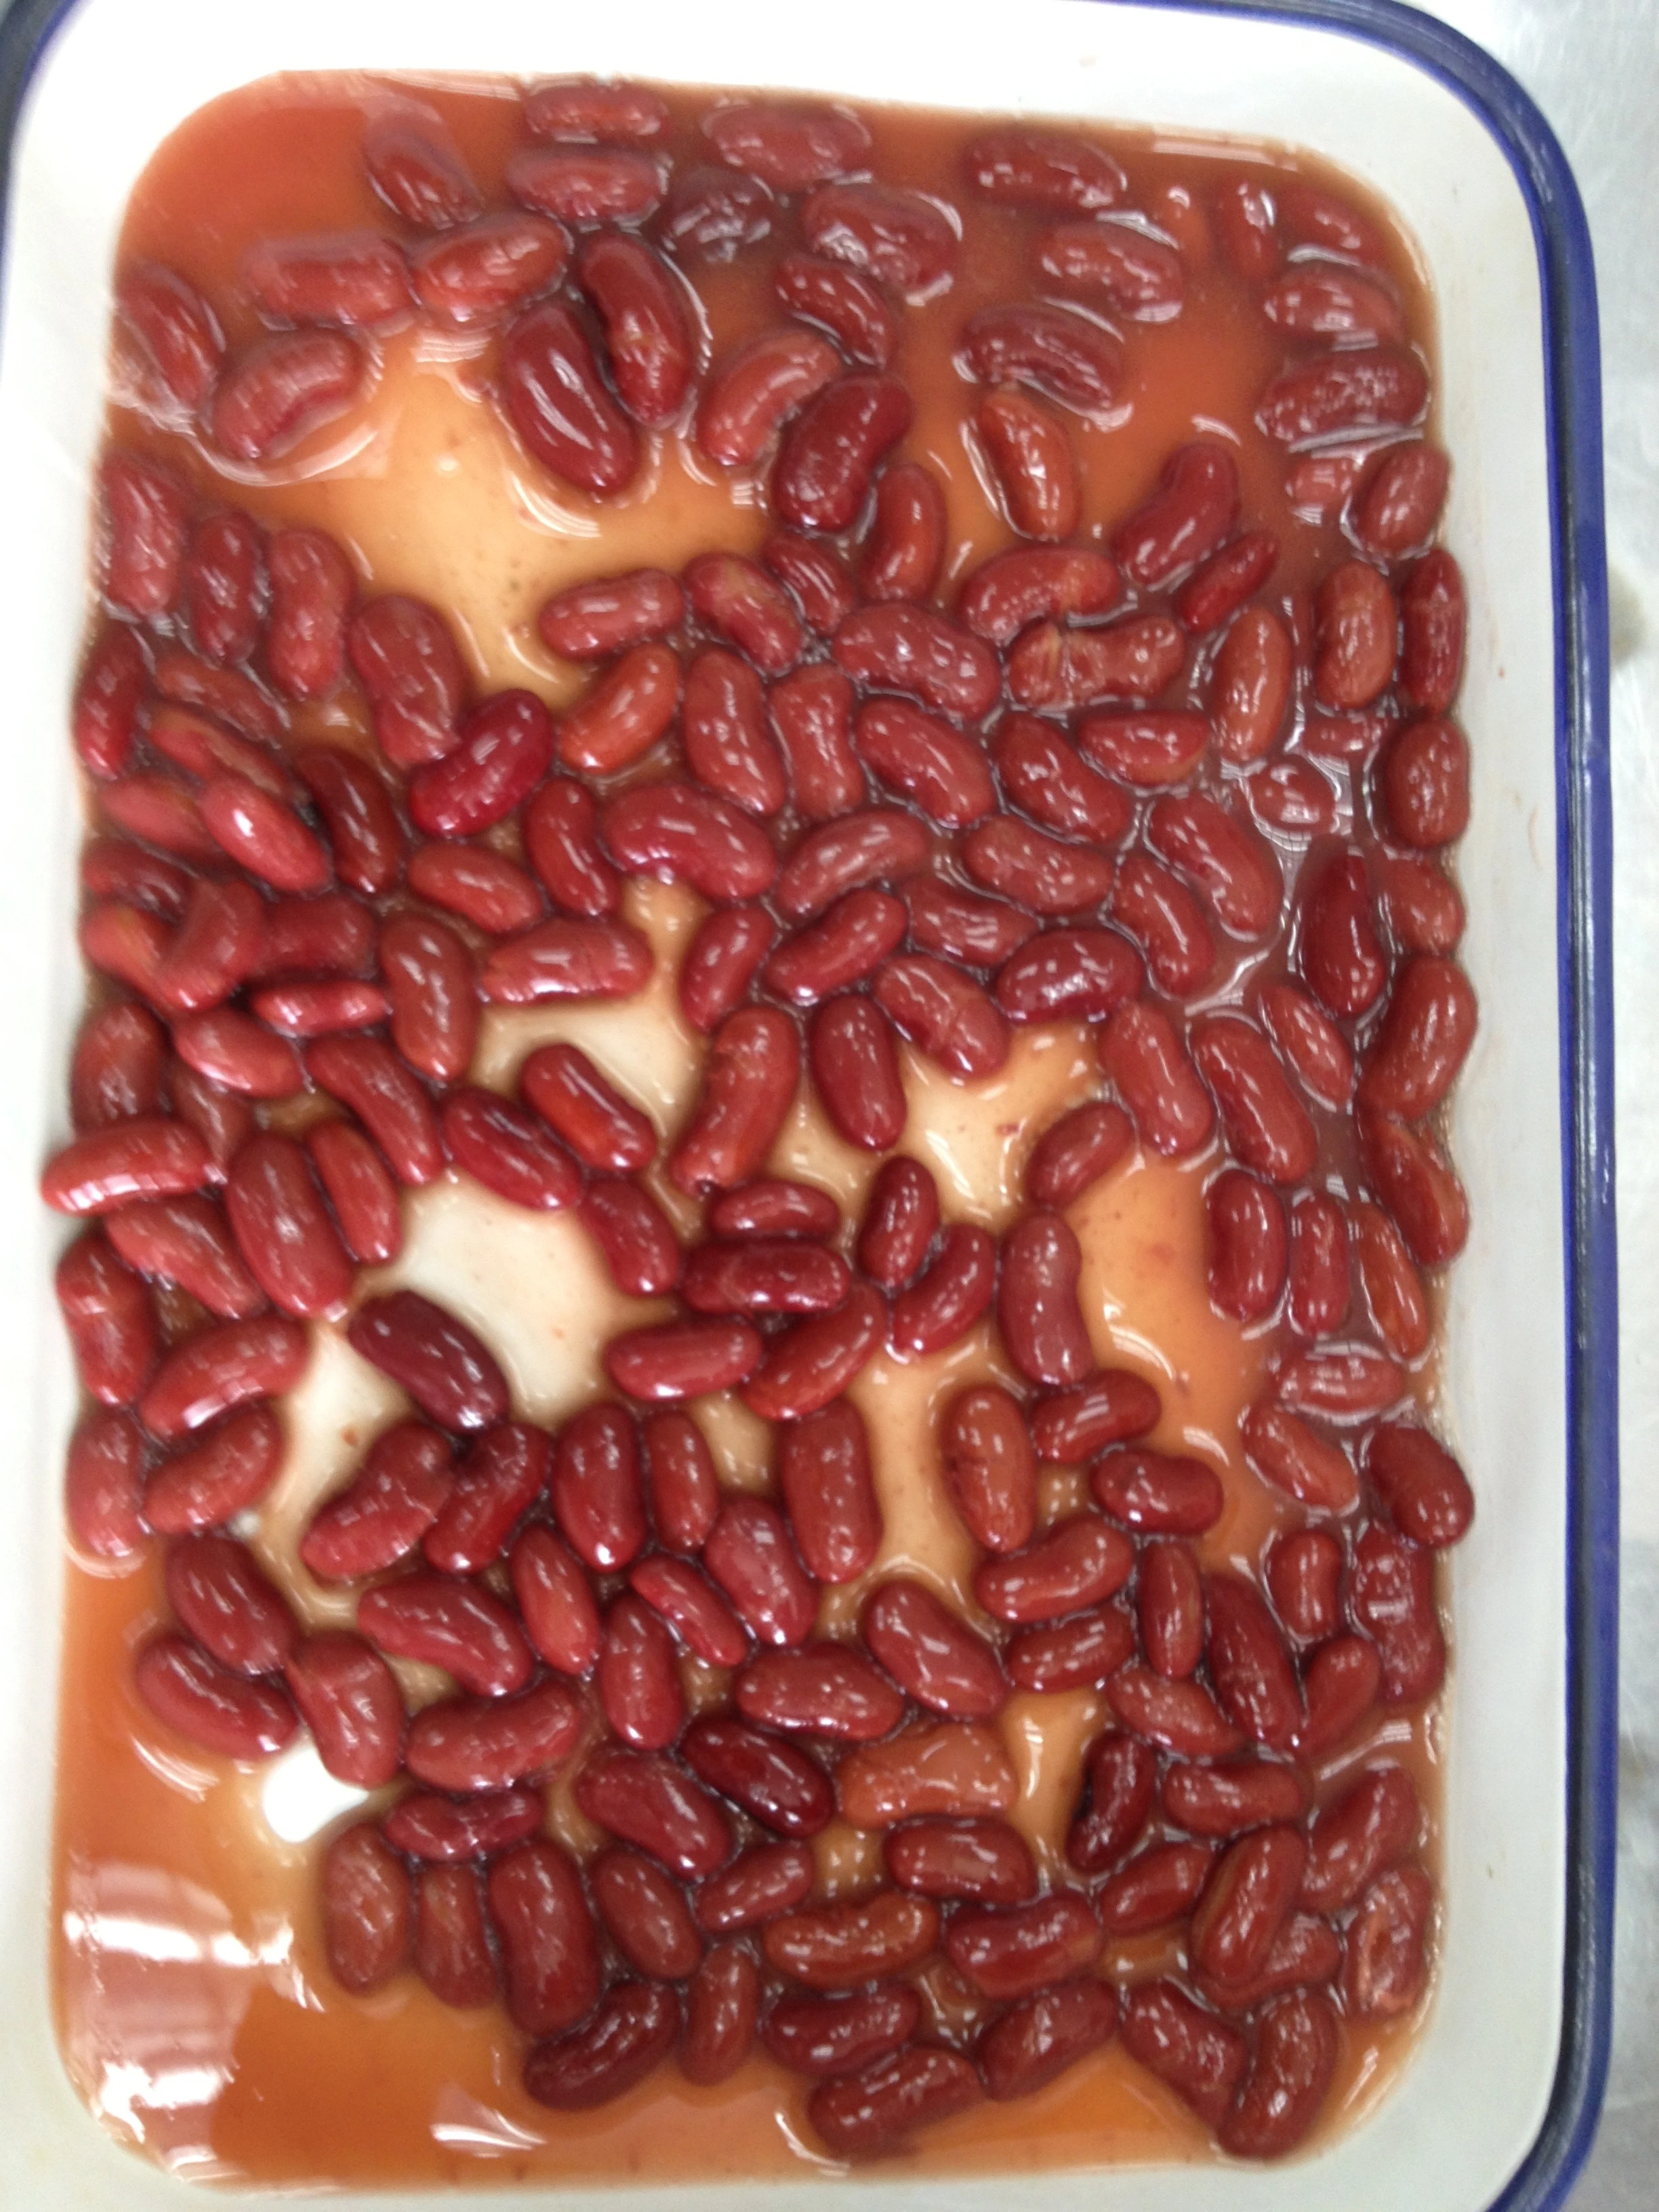 Canned Red Kidney Bean in Brine from factory directly